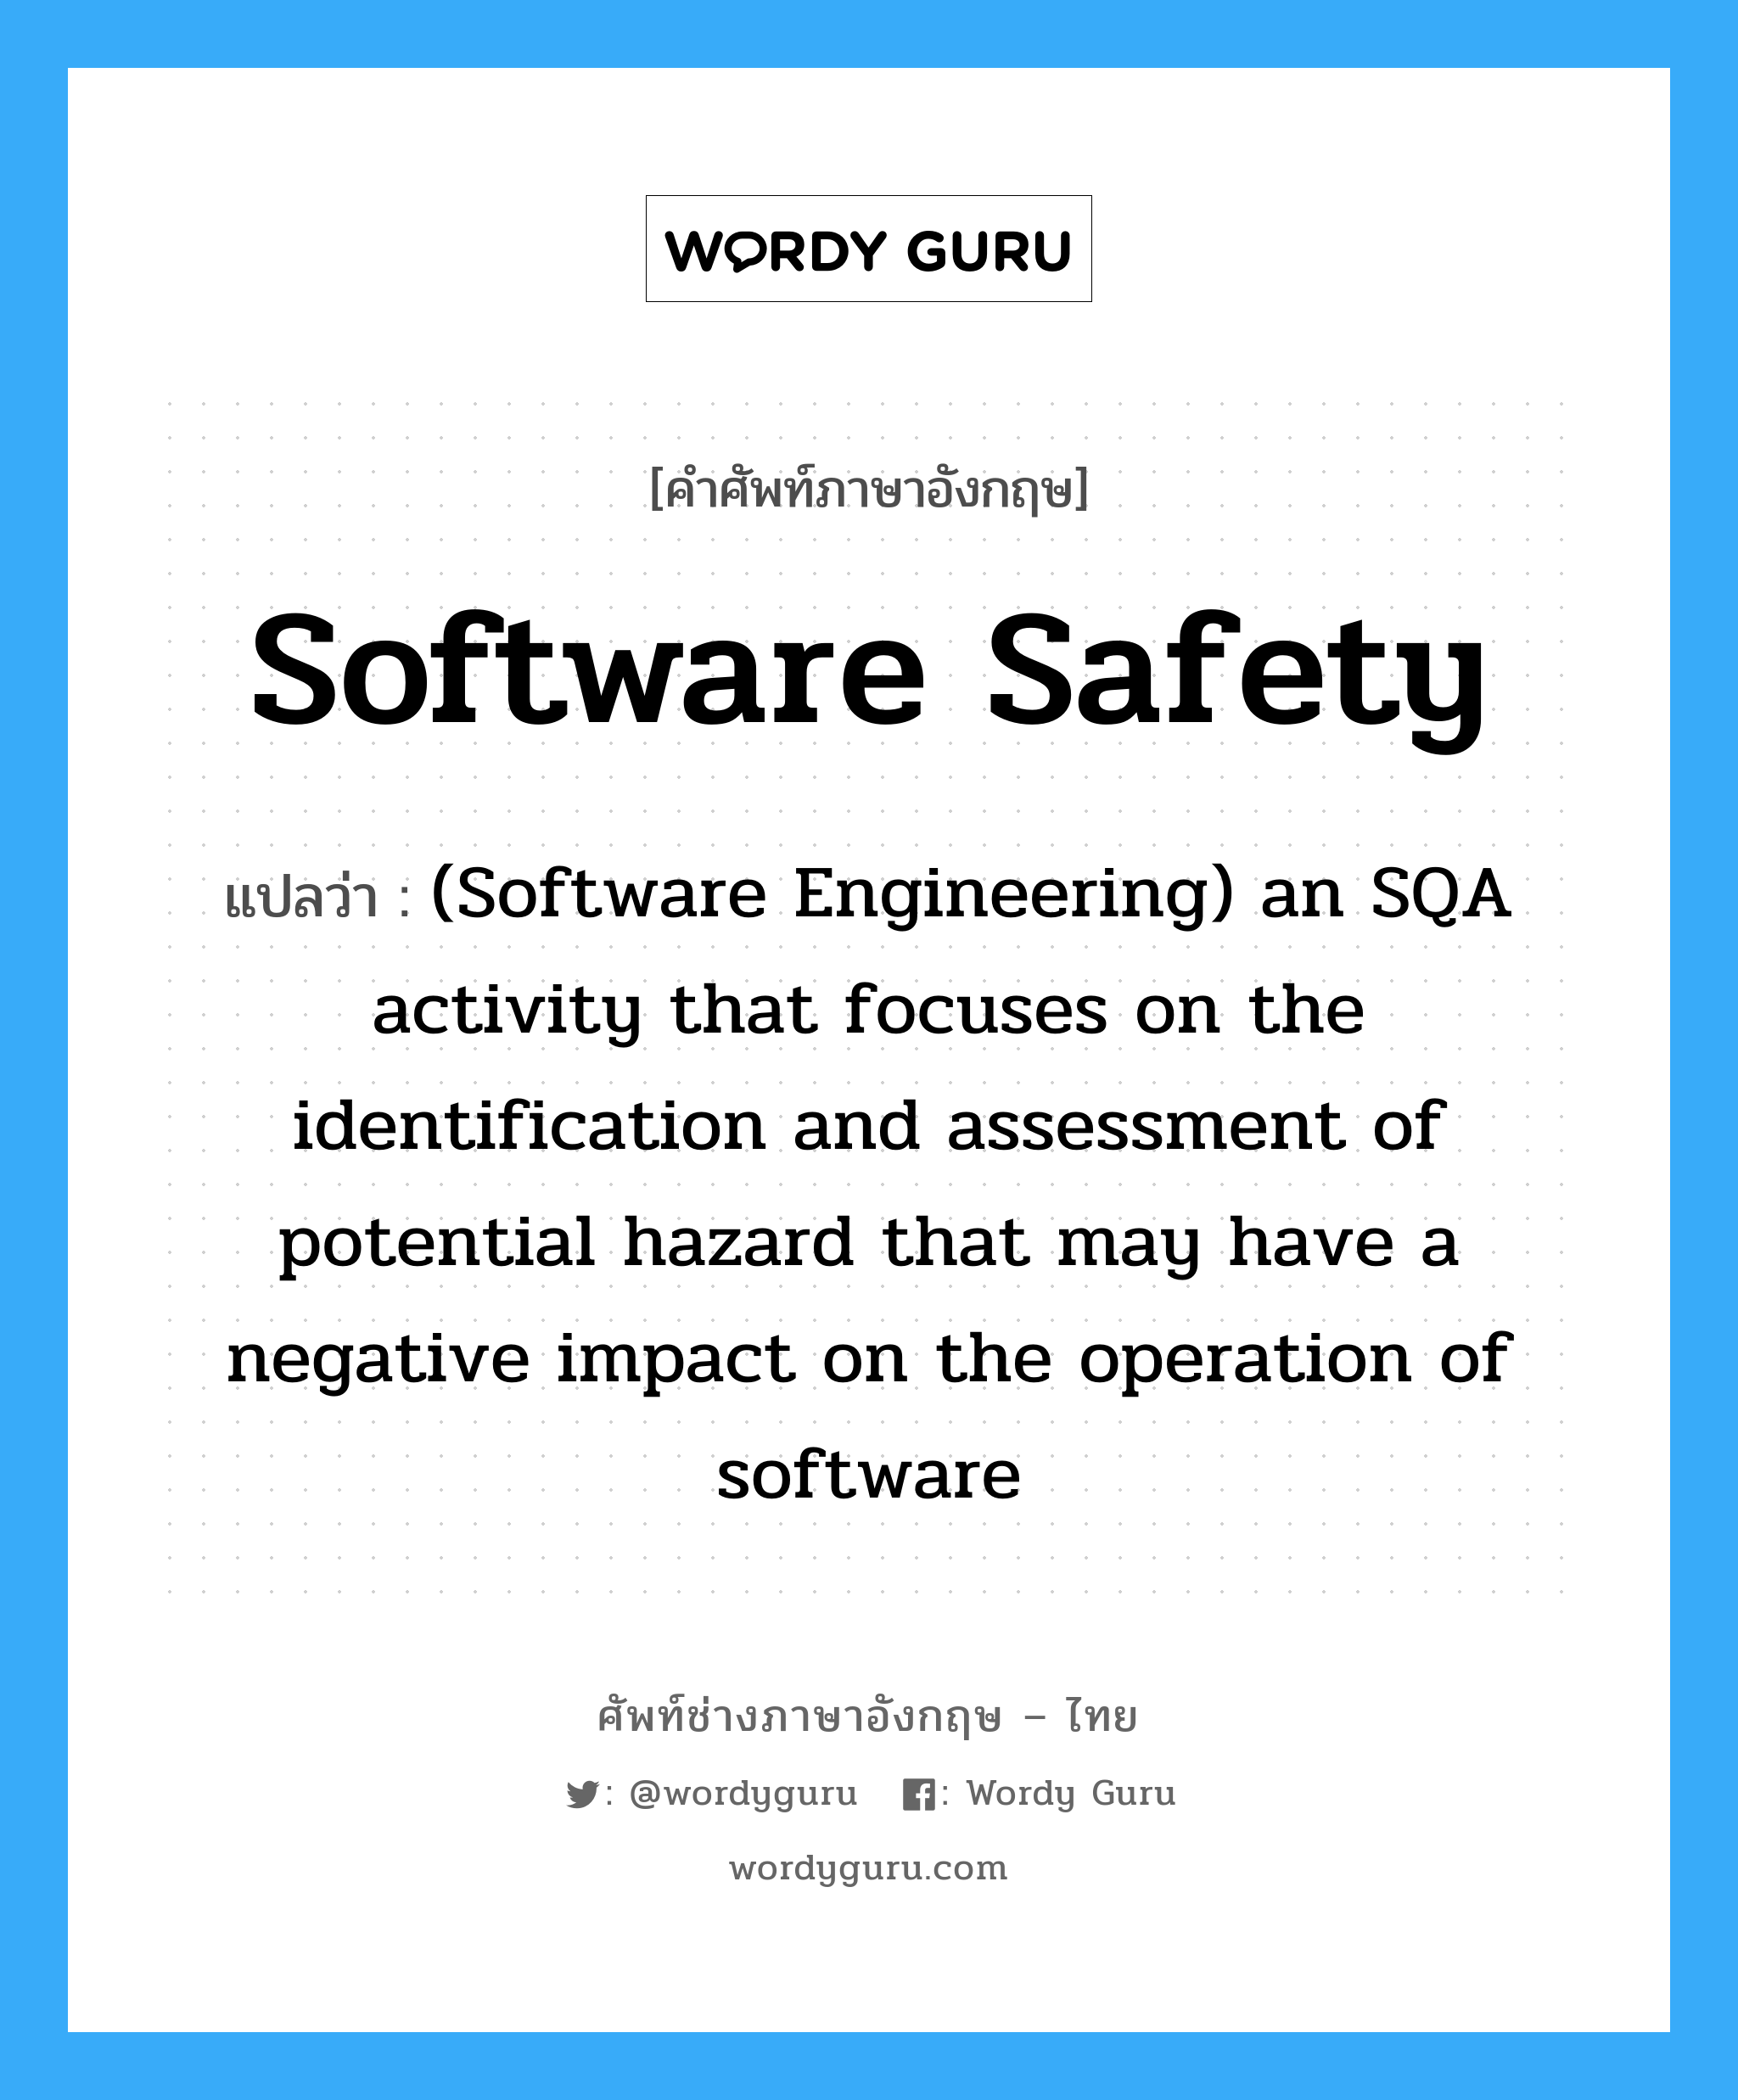 Software safety แปลว่า?, คำศัพท์ช่างภาษาอังกฤษ - ไทย Software safety คำศัพท์ภาษาอังกฤษ Software safety แปลว่า (Software Engineering) an SQA activity that focuses on the identification and assessment of potential hazard that may have a negative impact on the operation of software